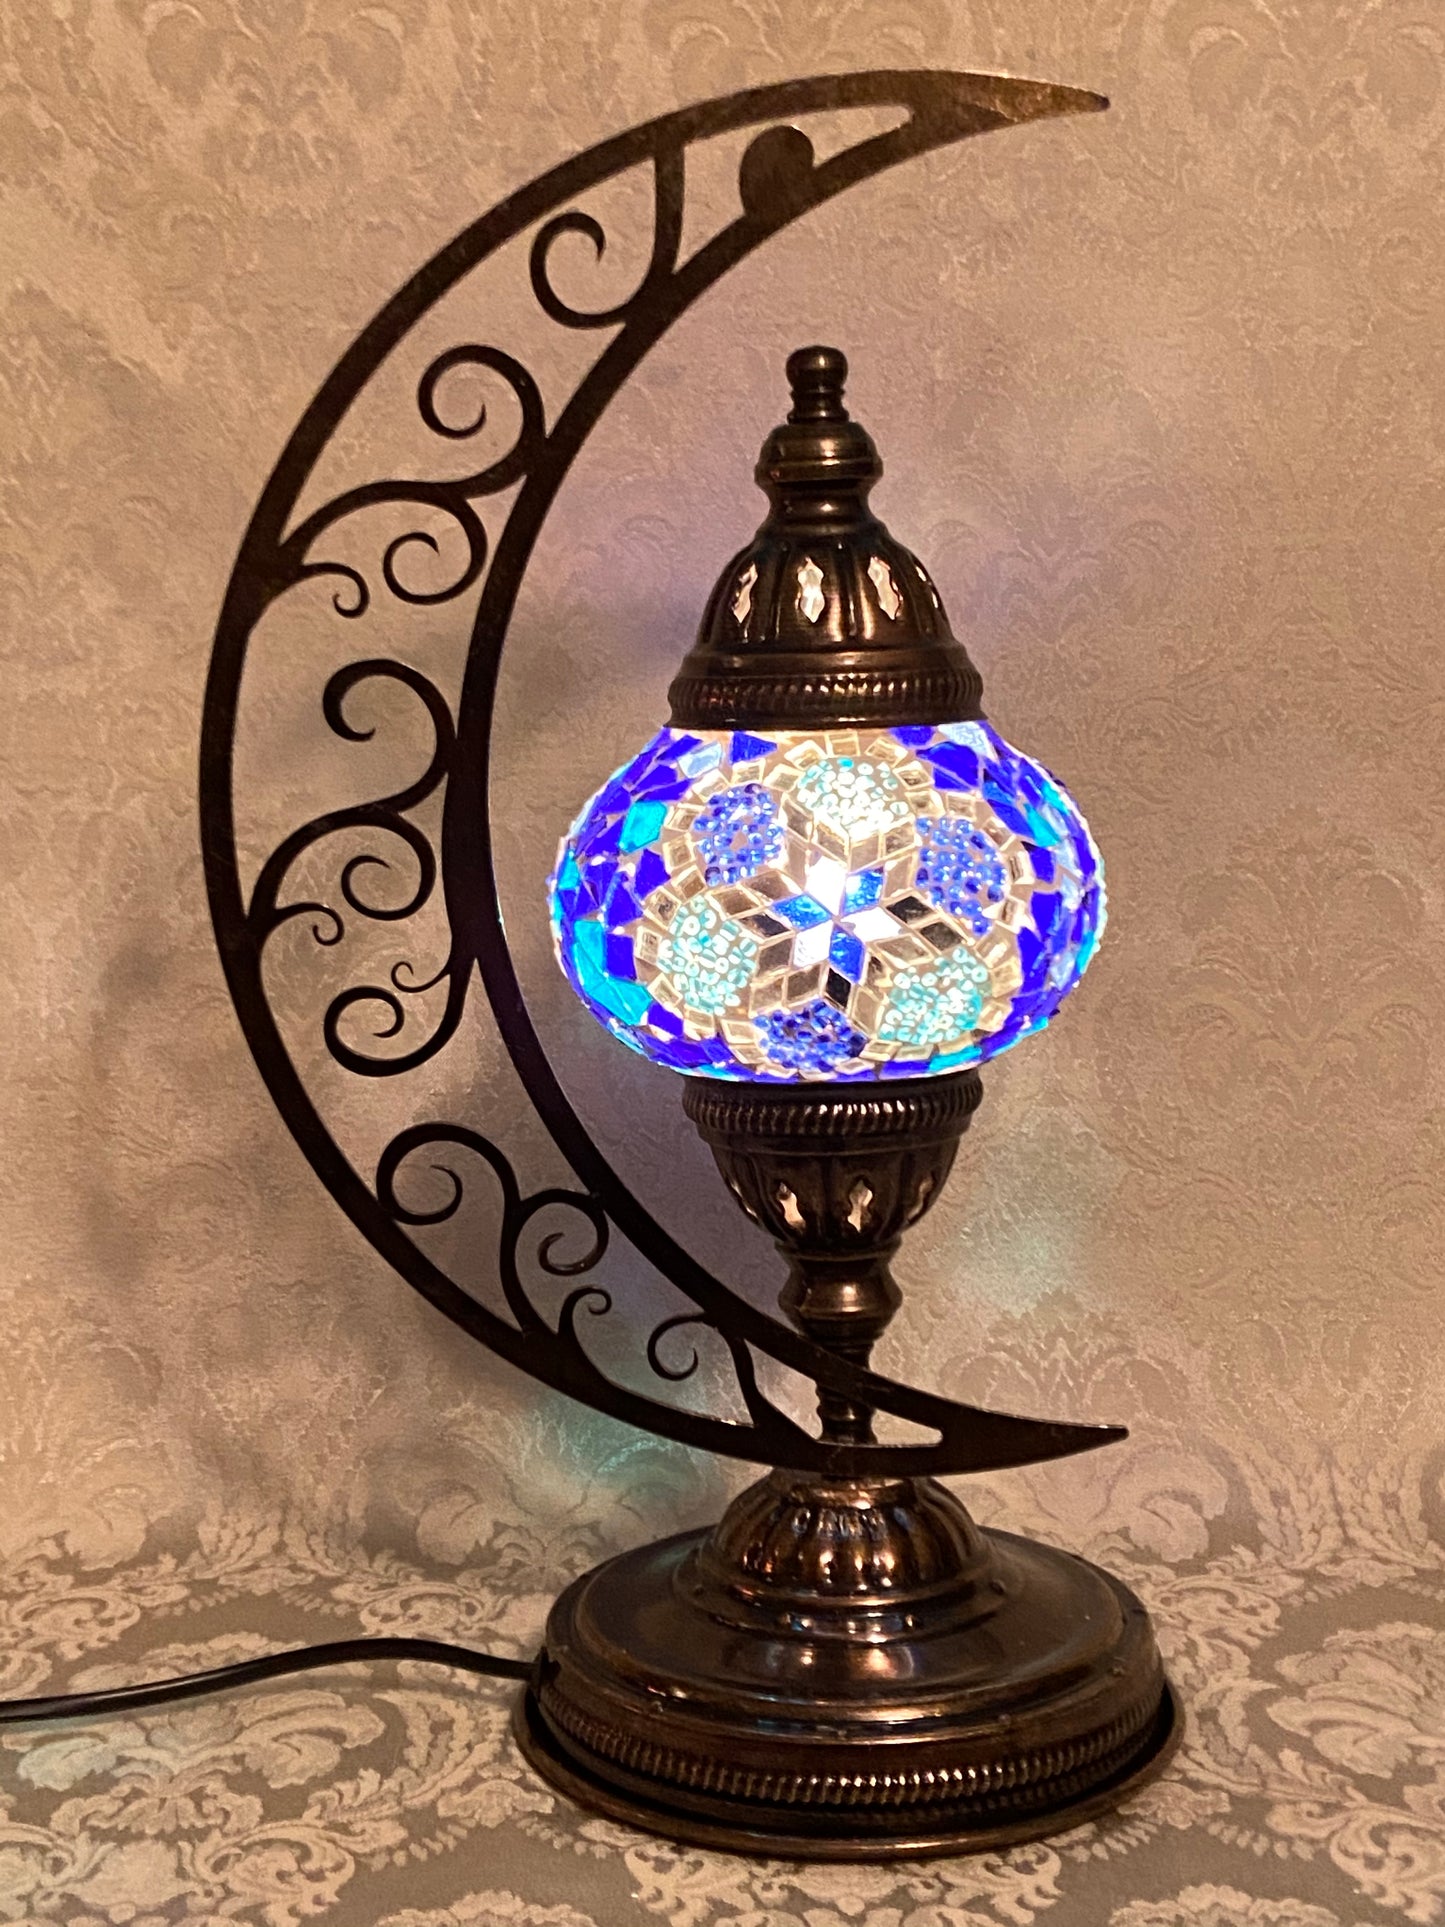 ISTANBUL CRESCENT MOON TABLE LAMP ROYAL BLUE